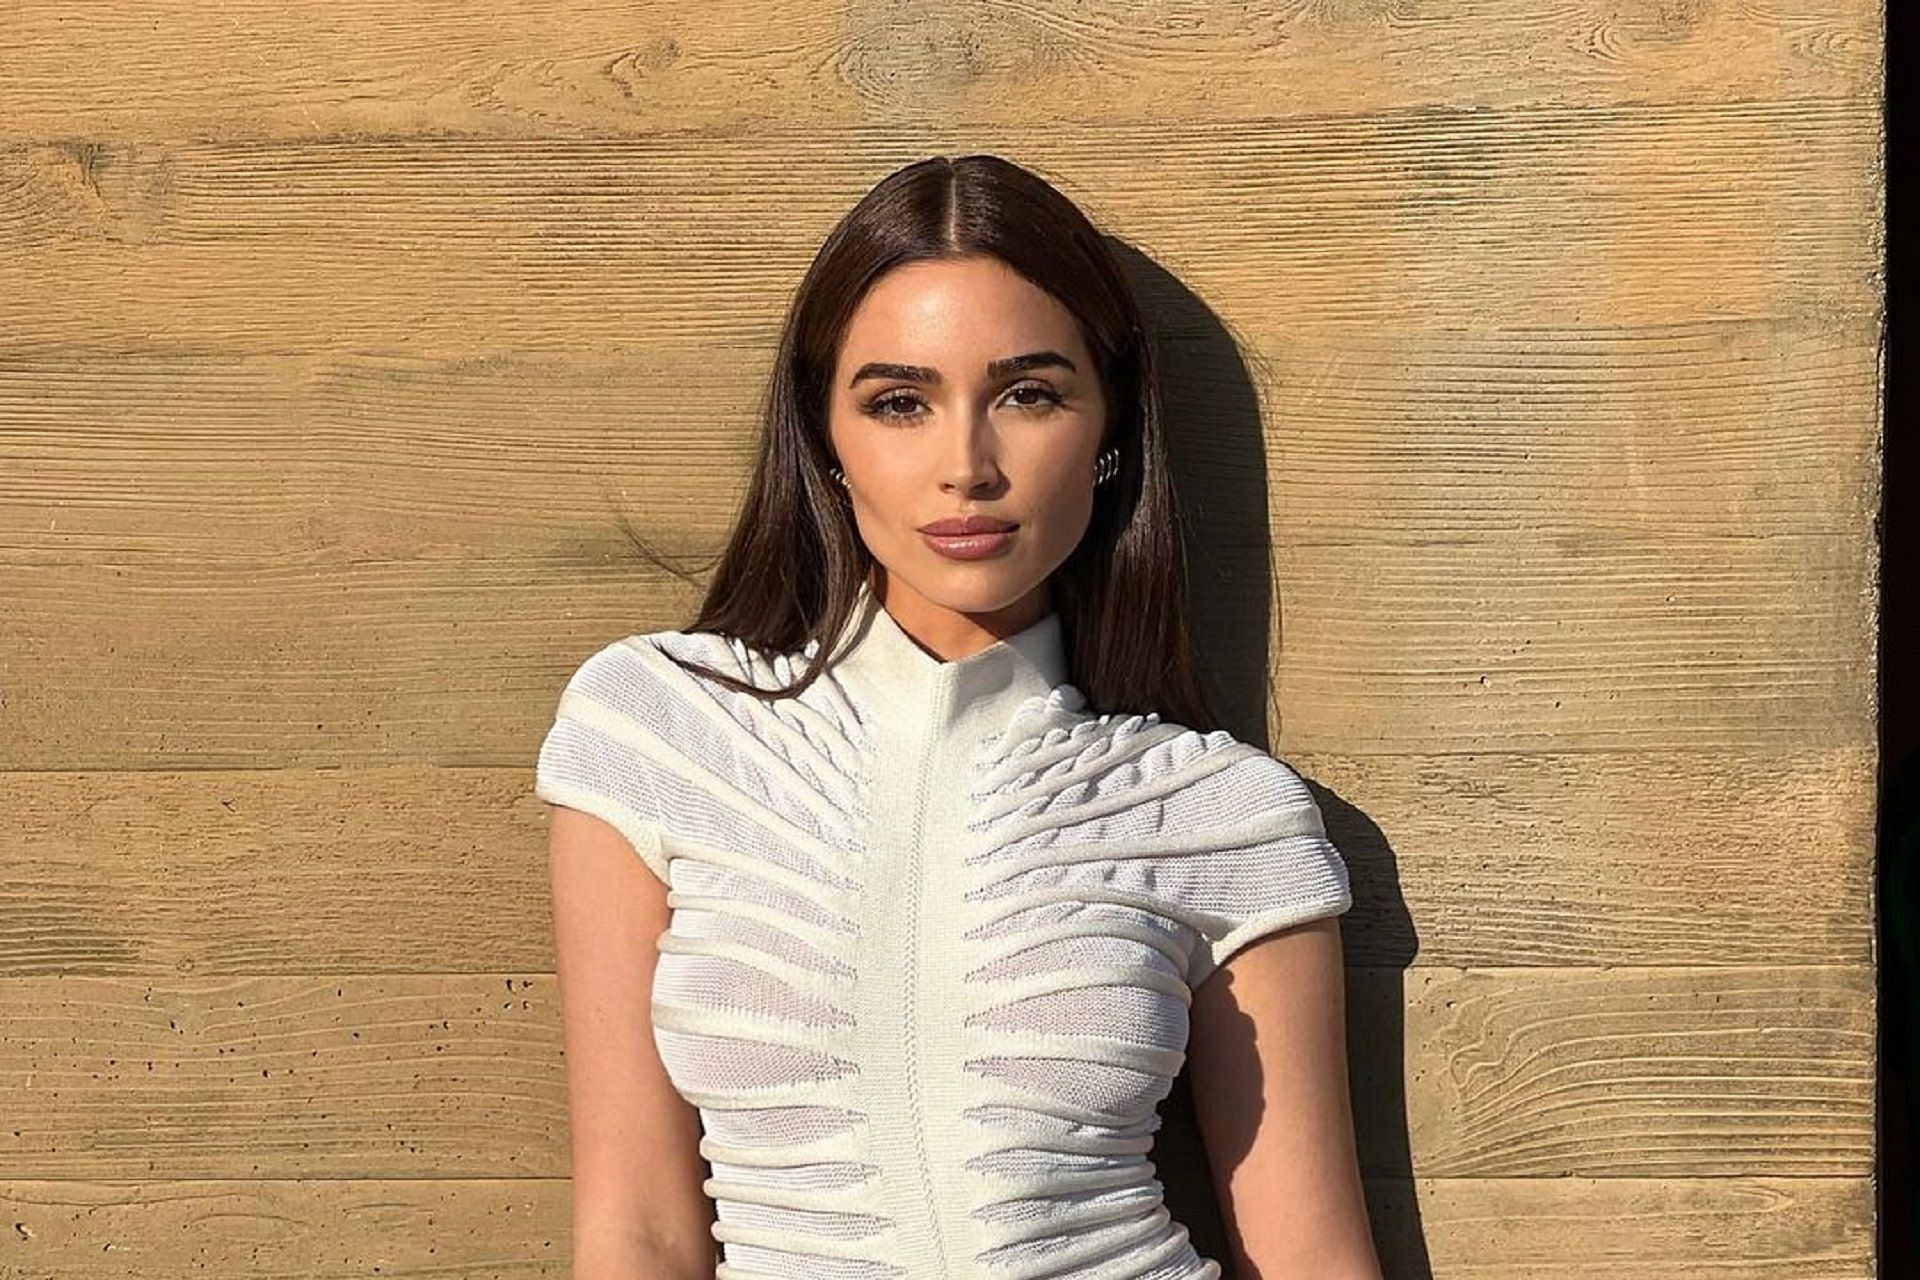 Olivia Culpo steals the show in recent LWD snaps (Pic Credit: Instagram @oliviaculpo)